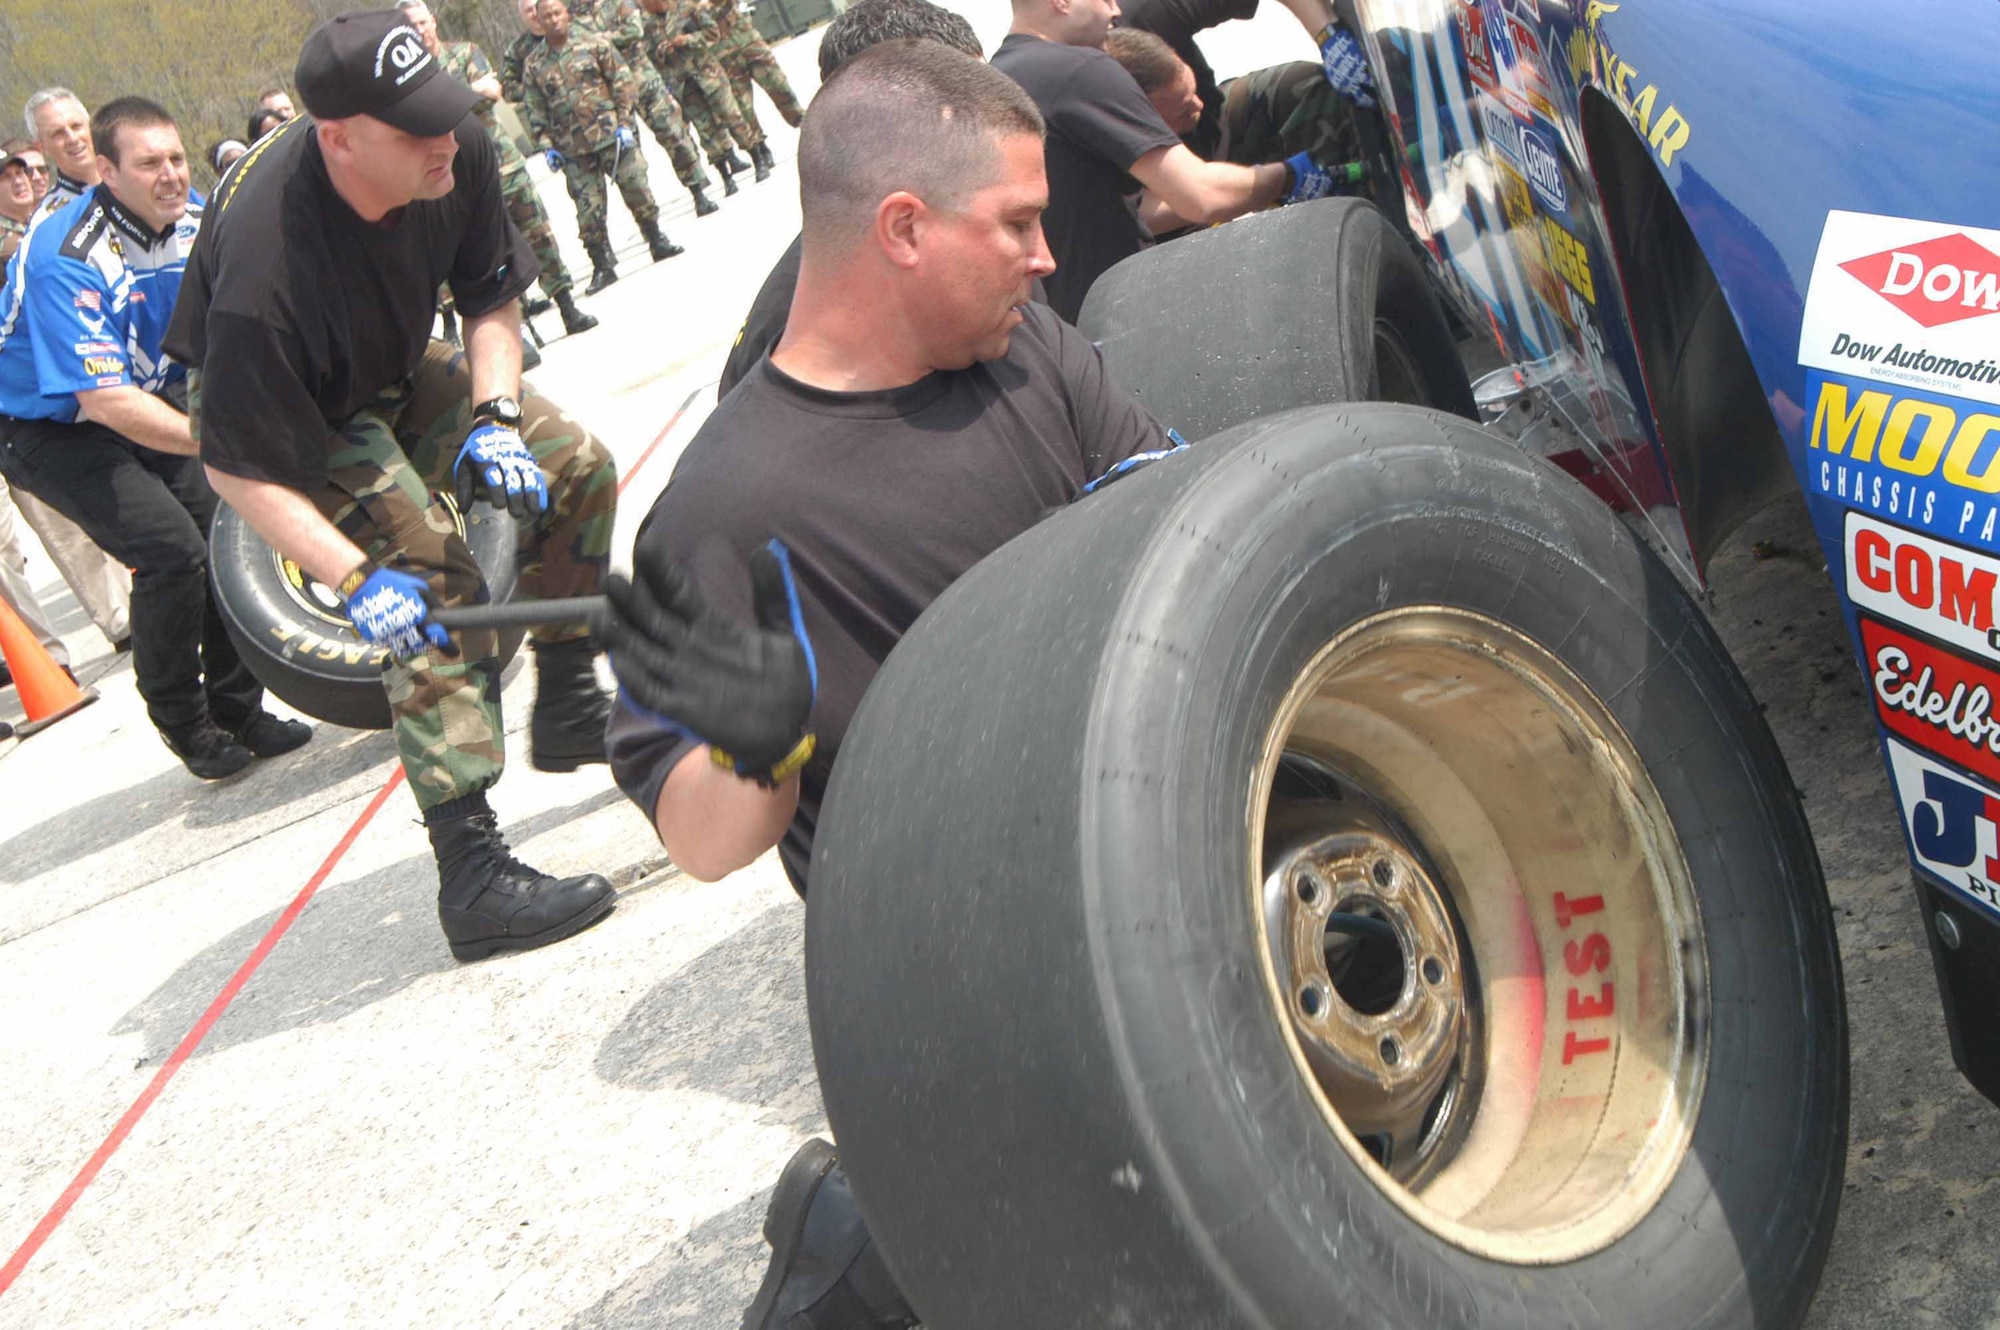 TSgt. Barry Stone, 19th JV team, lifts the right front tire out of the way so it can be replaced. The 19th JV team won the competition. U. S. Air Force photo by Sue Sapp    